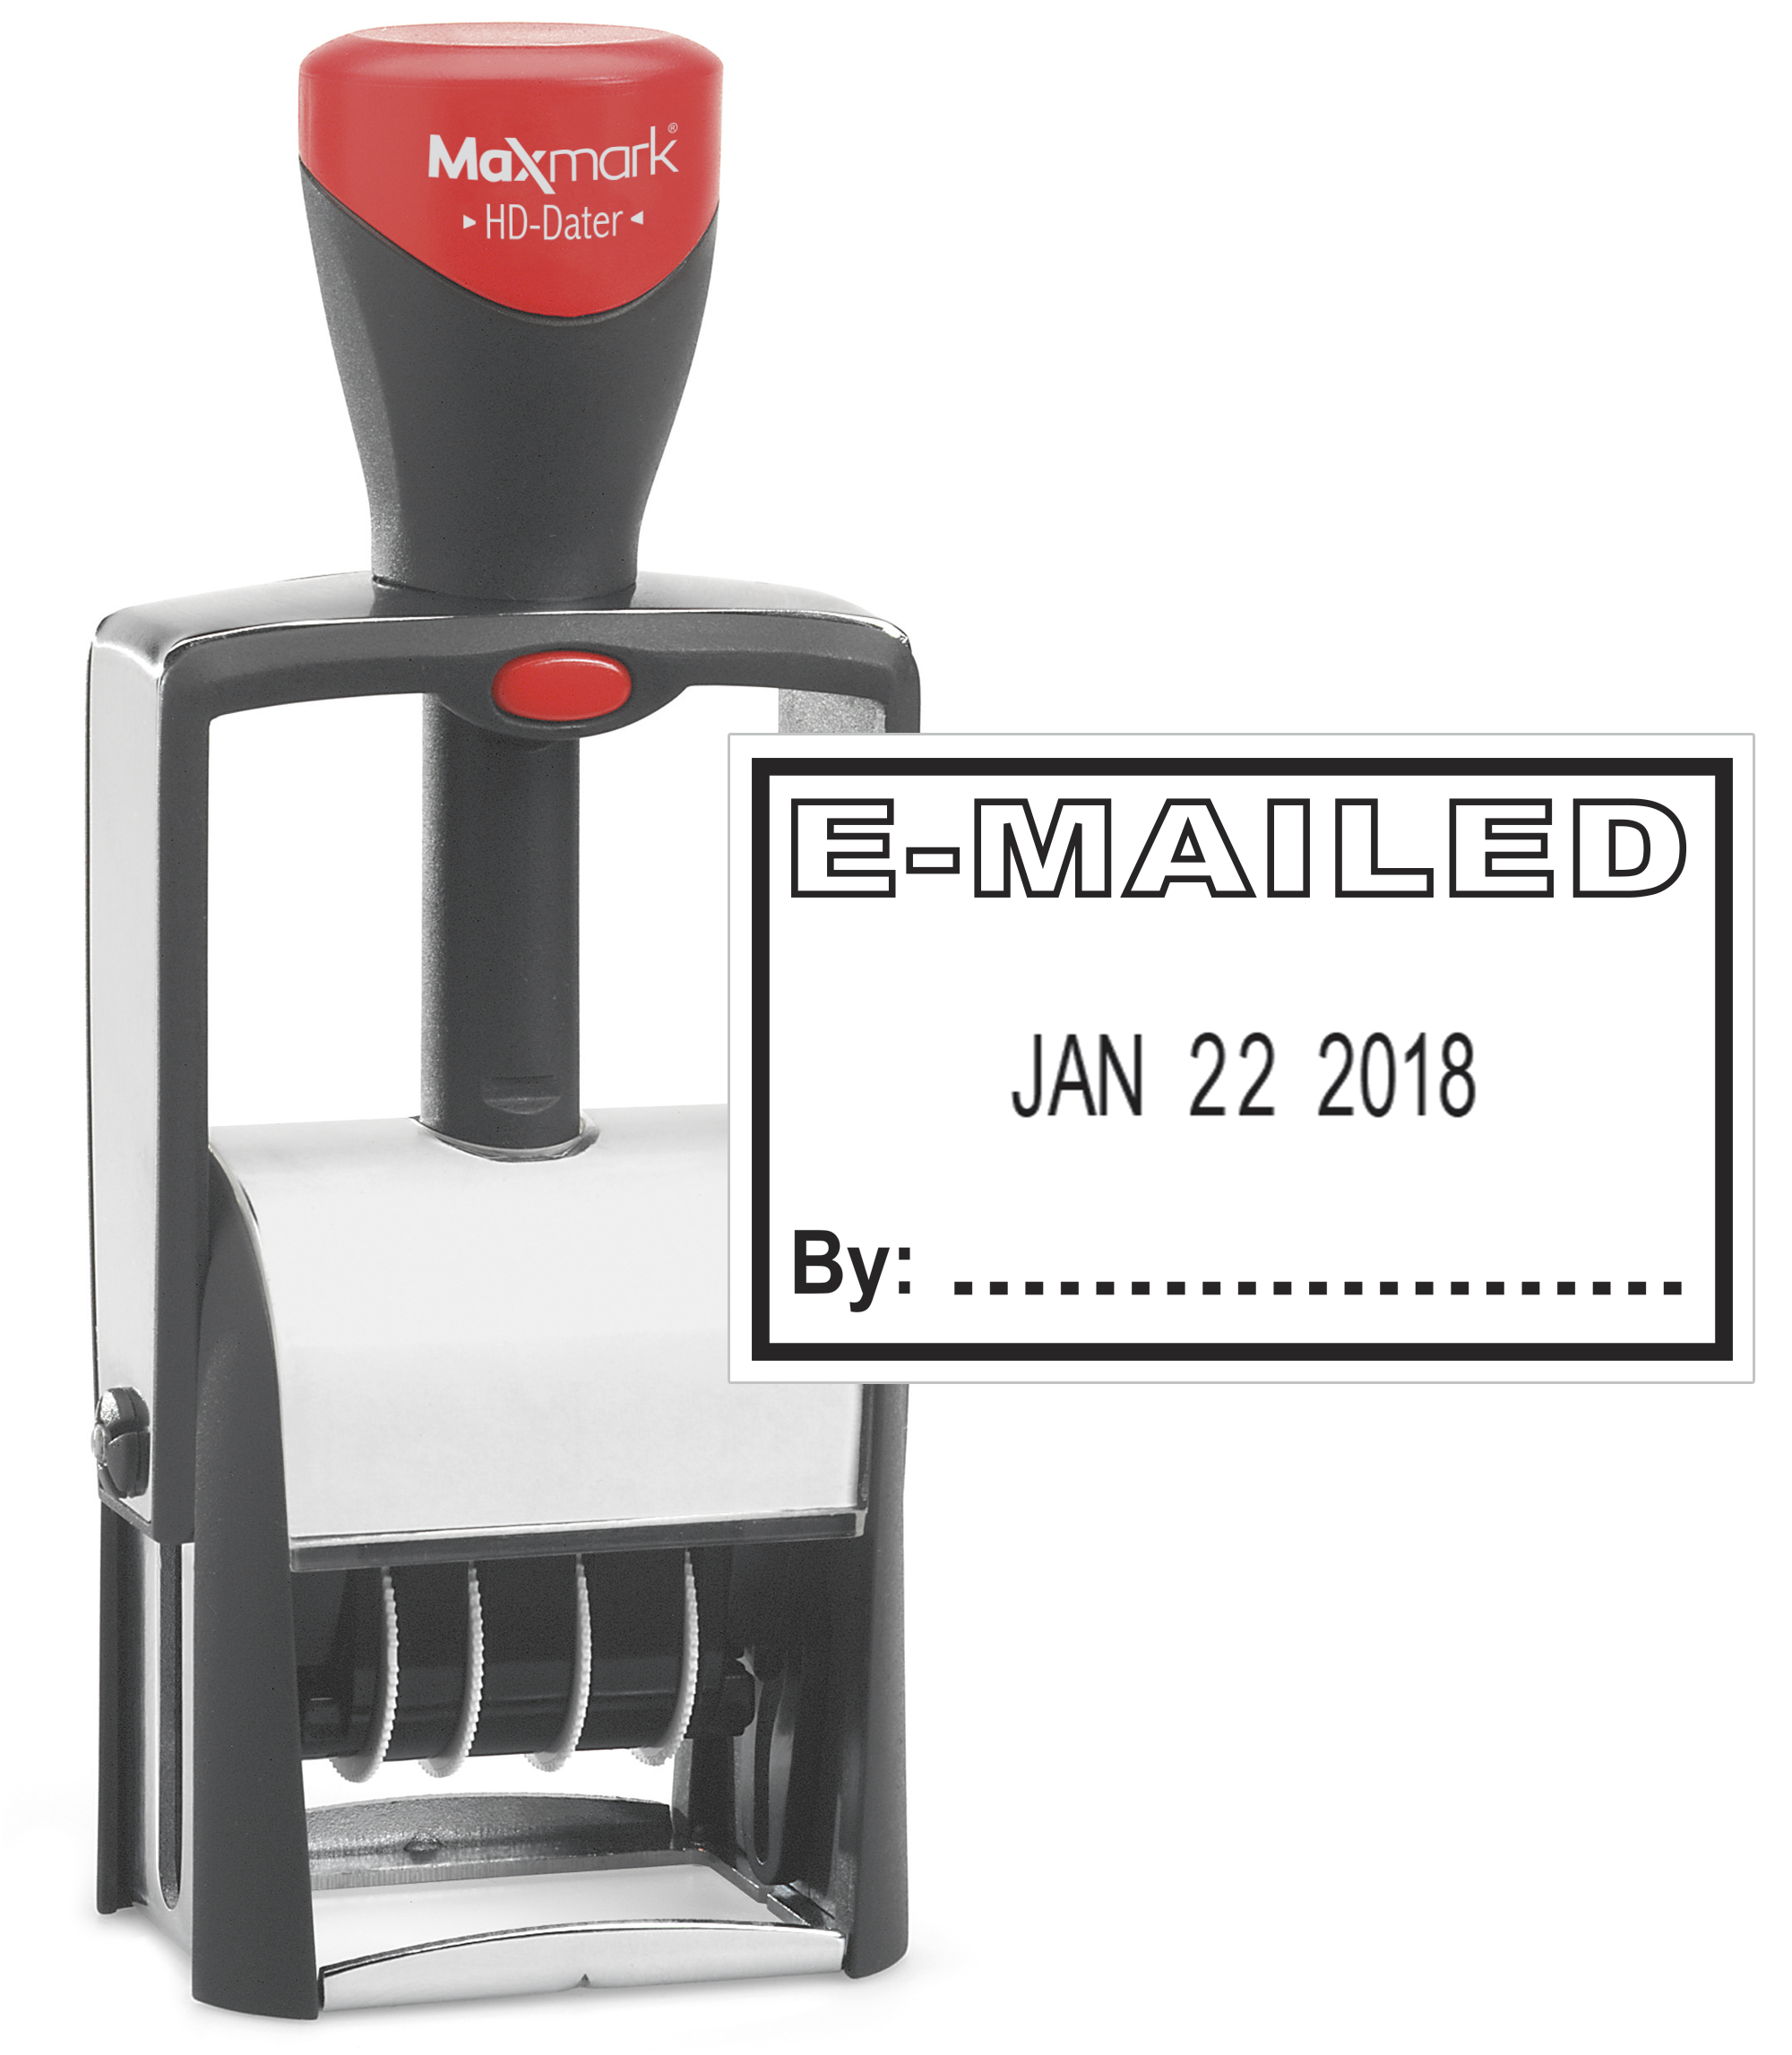 Heavy Duty Date Stamp with "EMAILED" Self Inking Stamp - BLACK Ink